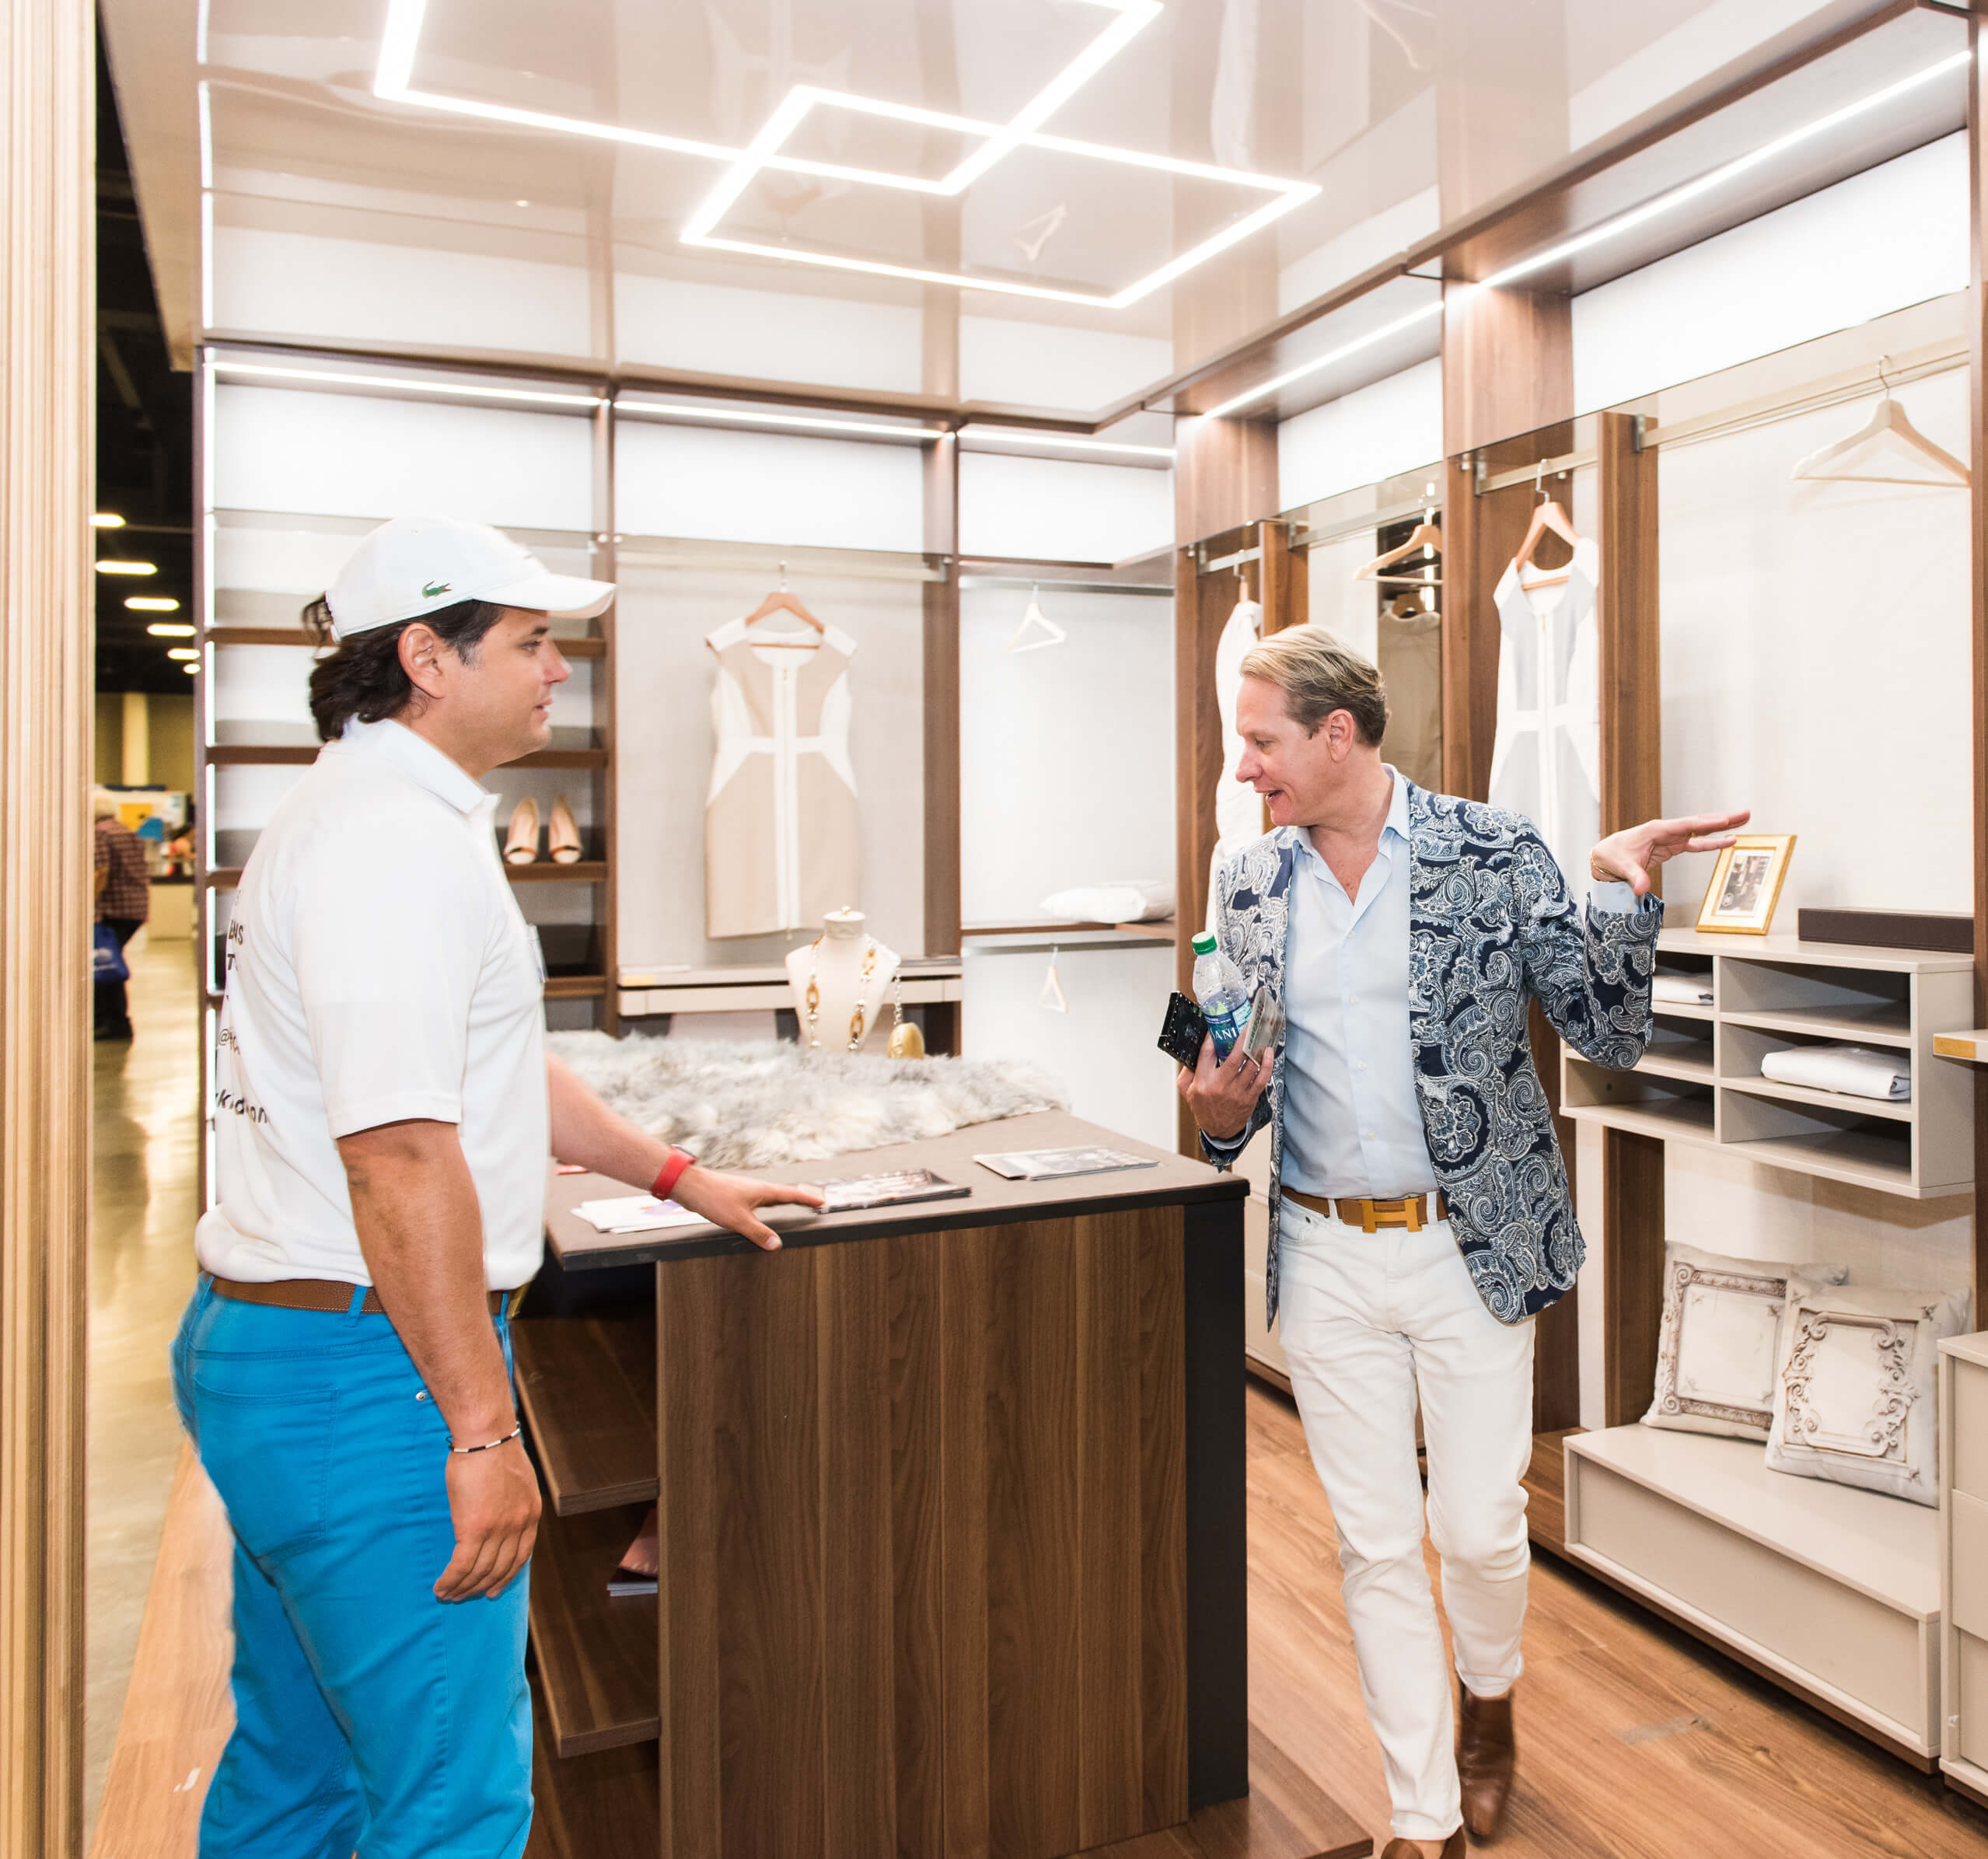 Designer and TV personality Carson Kressley chats with vendors at Home Design & Remodeling Show